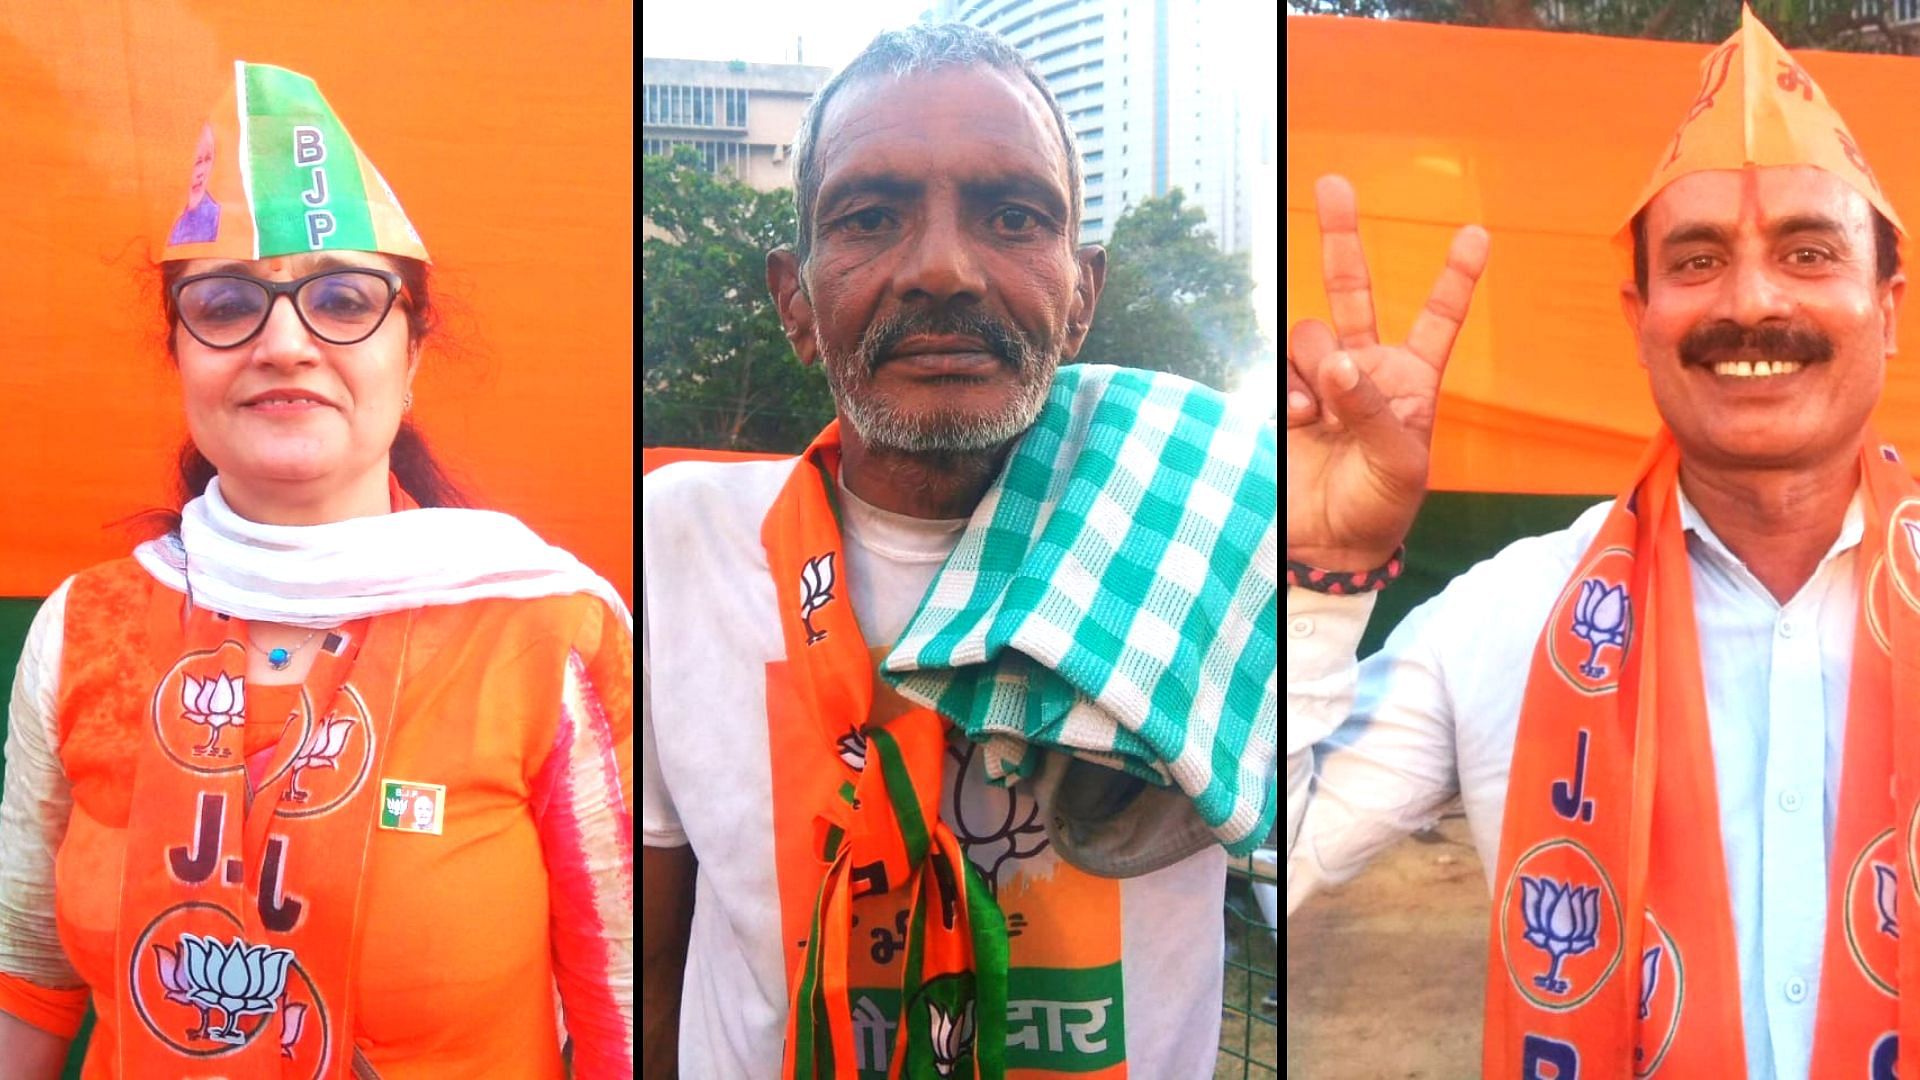 At Modi’s Ramlila Maidan rally, people from all walks of life talk about the progress of BJP in the past 5 years.